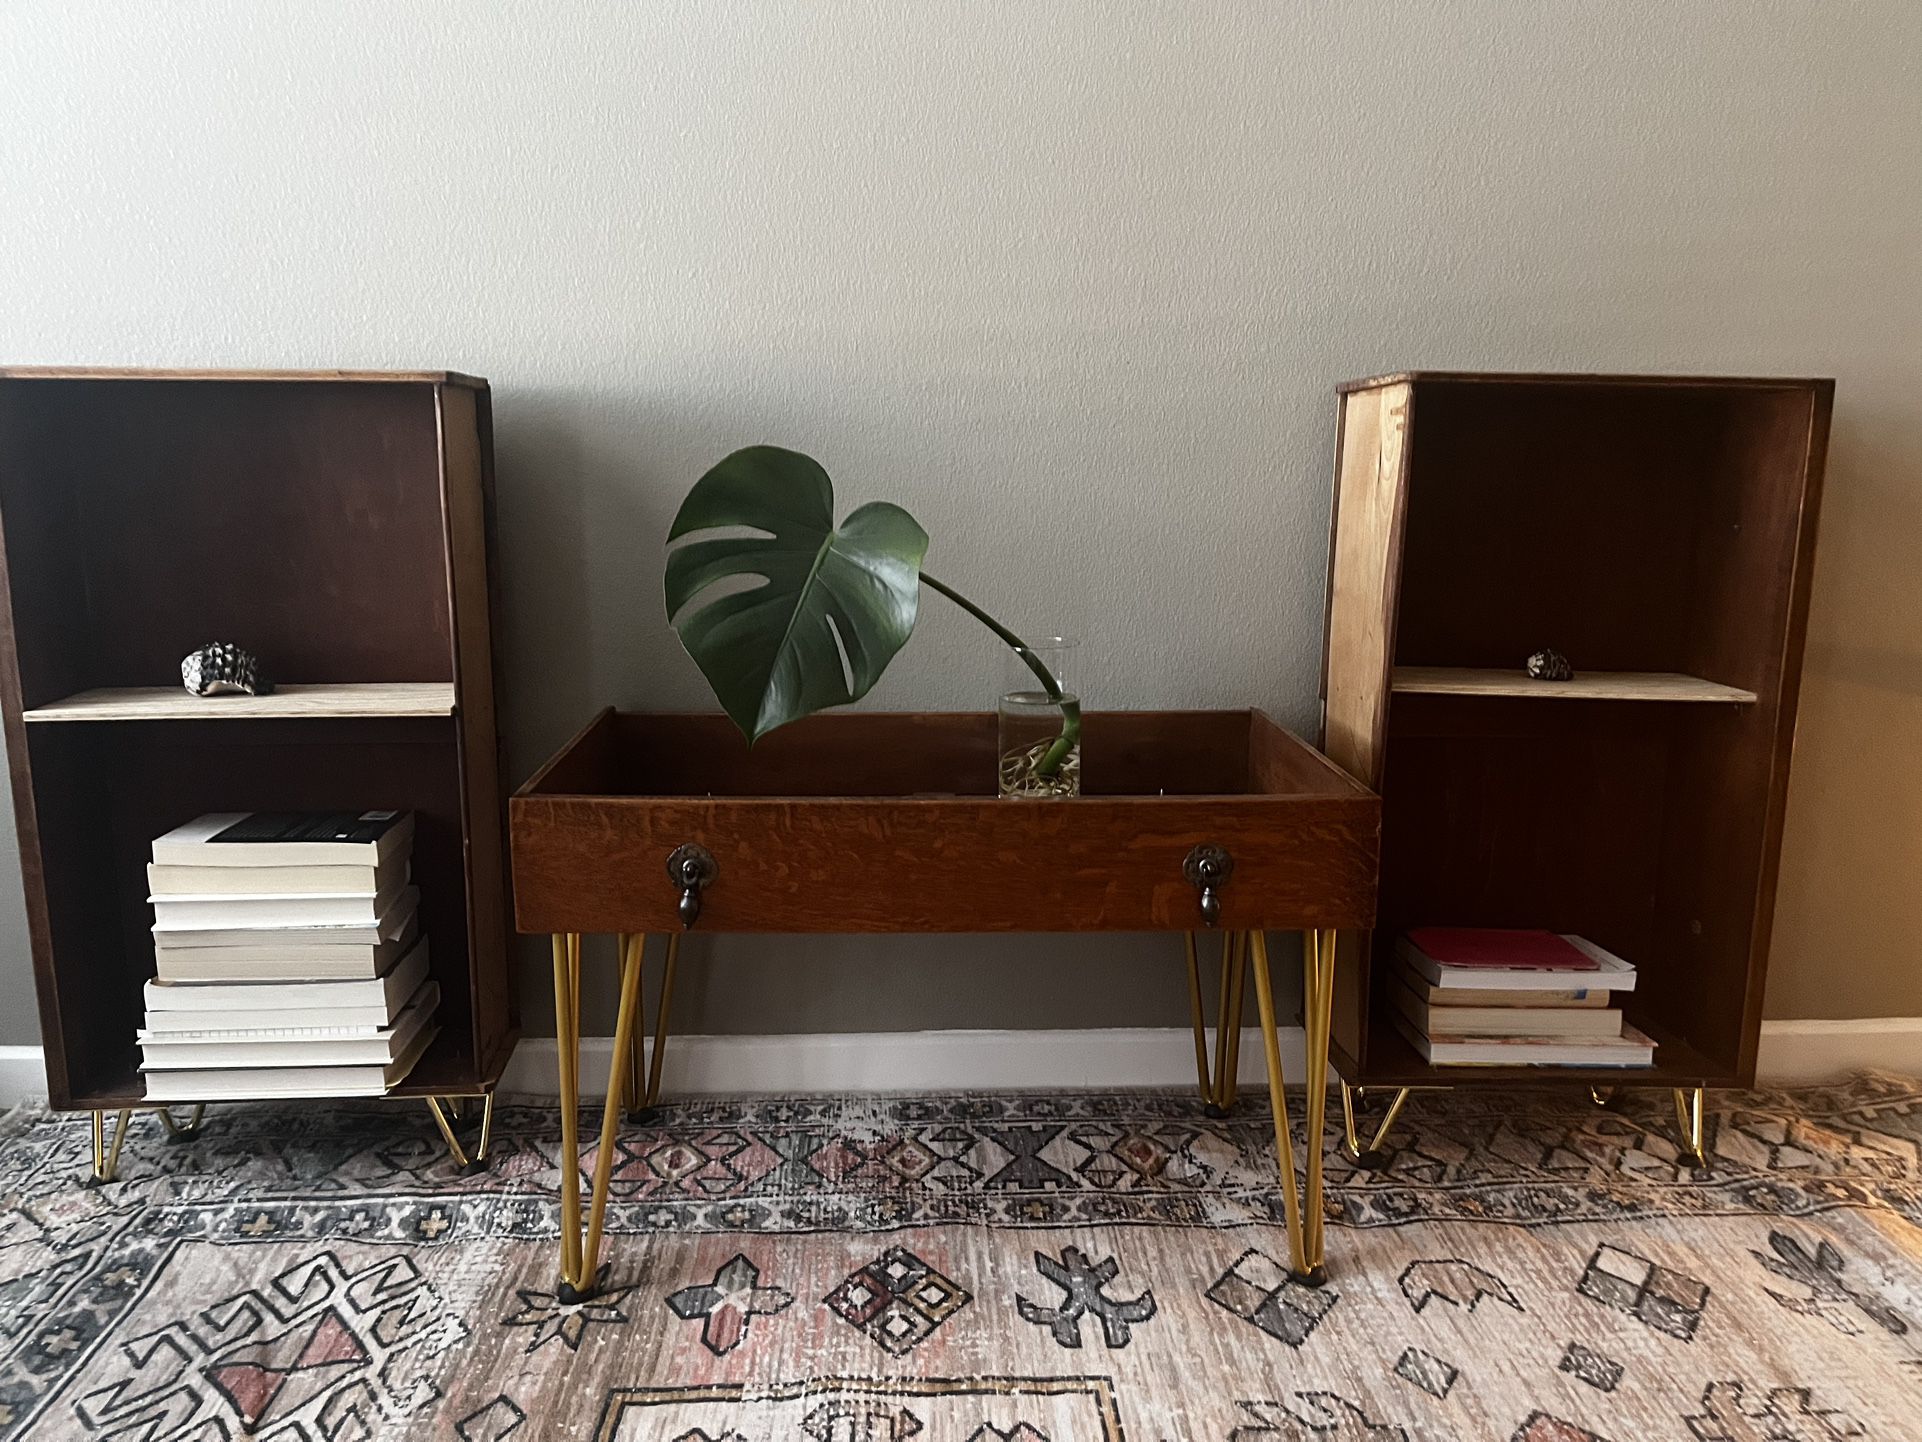 Midcentury Modern Shelves And Table